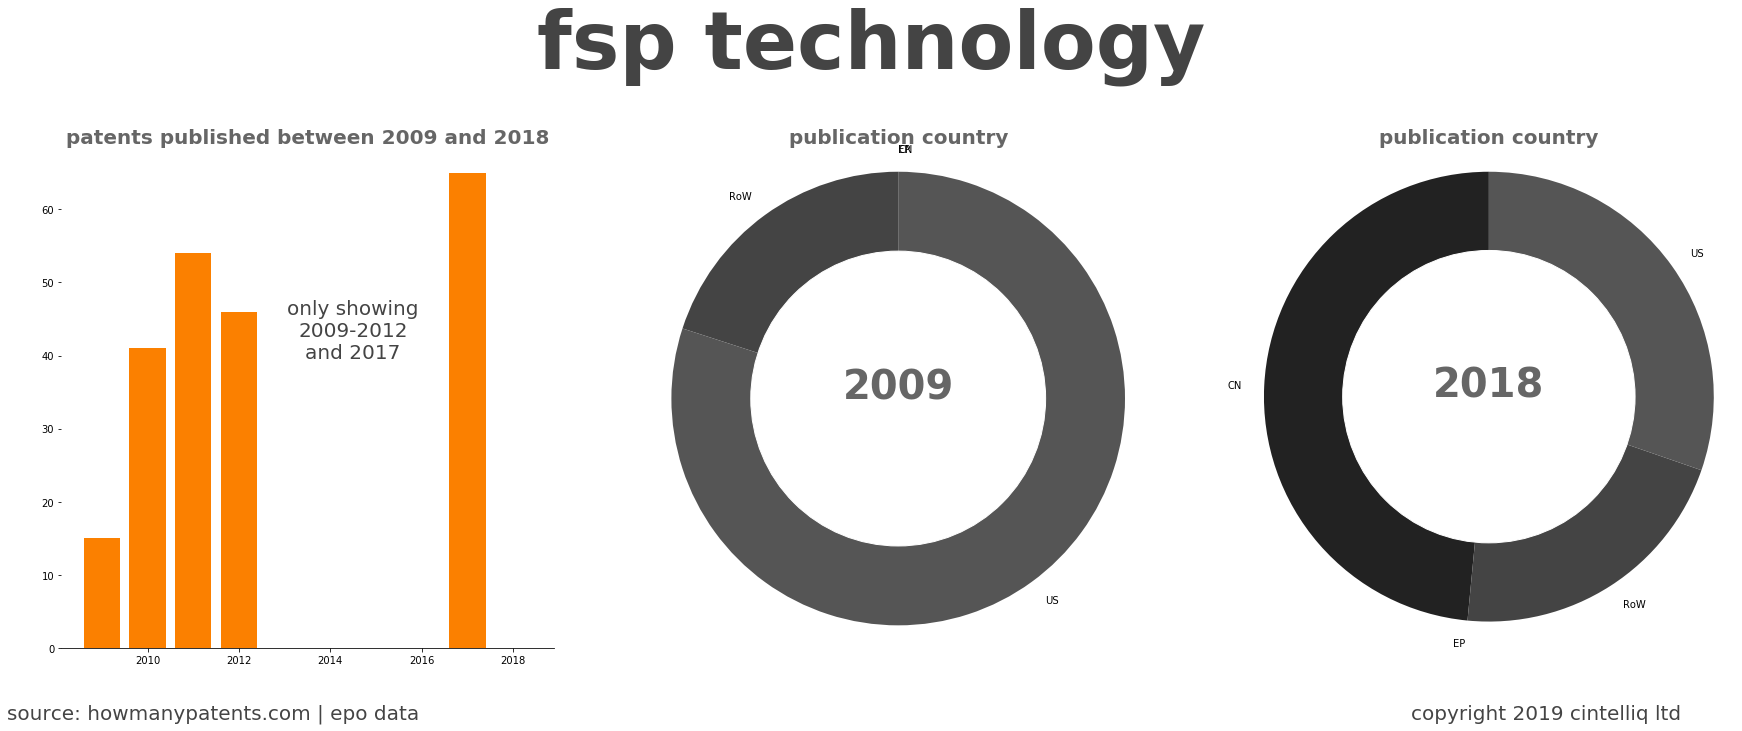 summary of patents for Fsp Technology